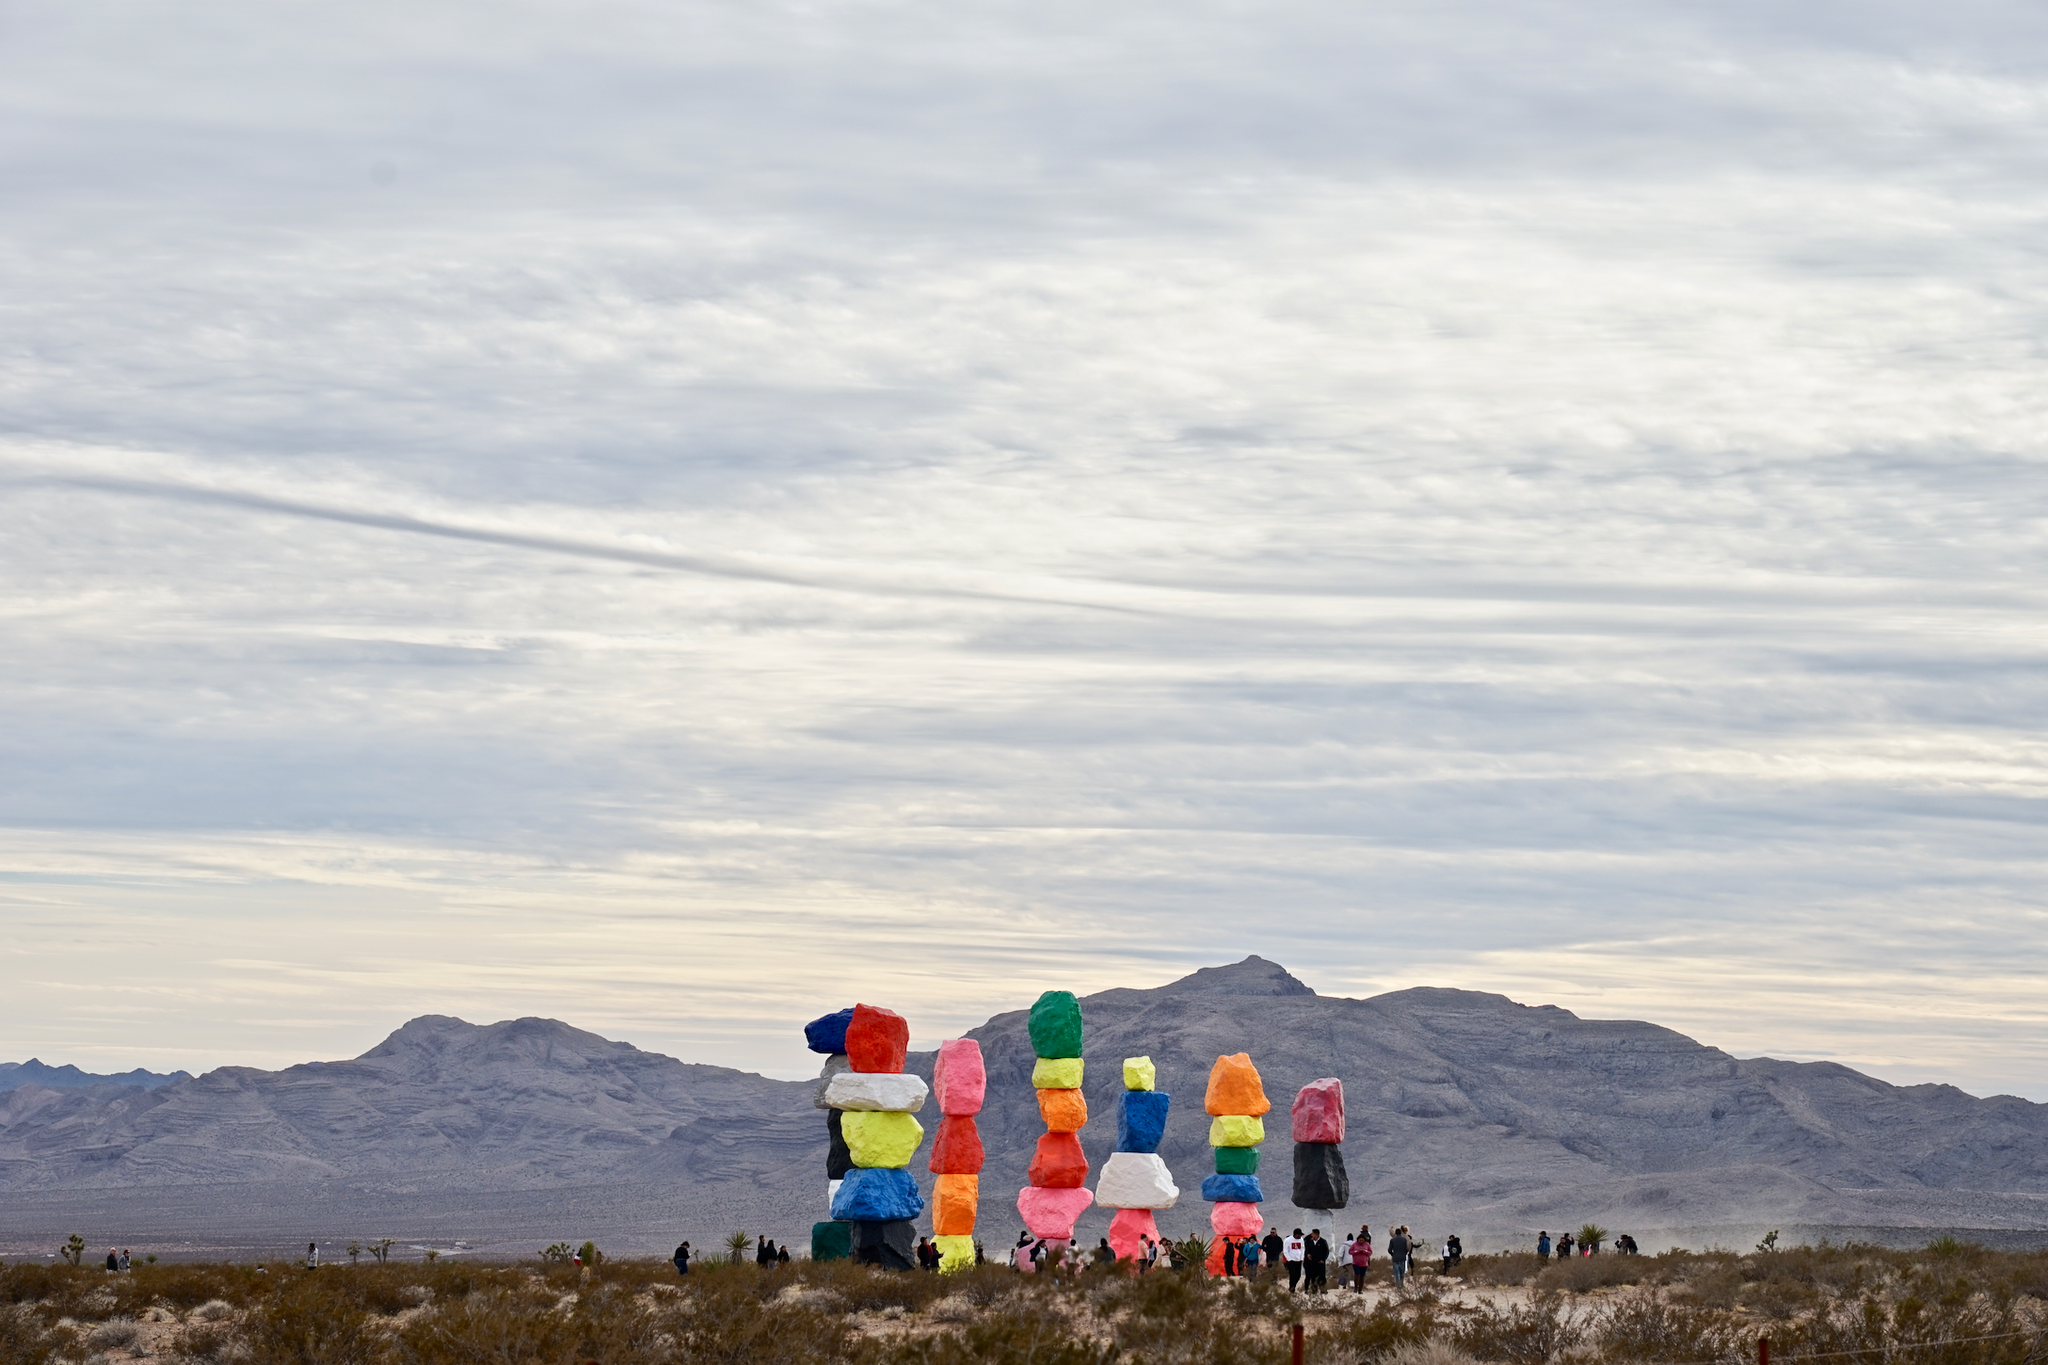 FIELD TEST FRIDAY: SEVEN MAGIC MOUNTAINS